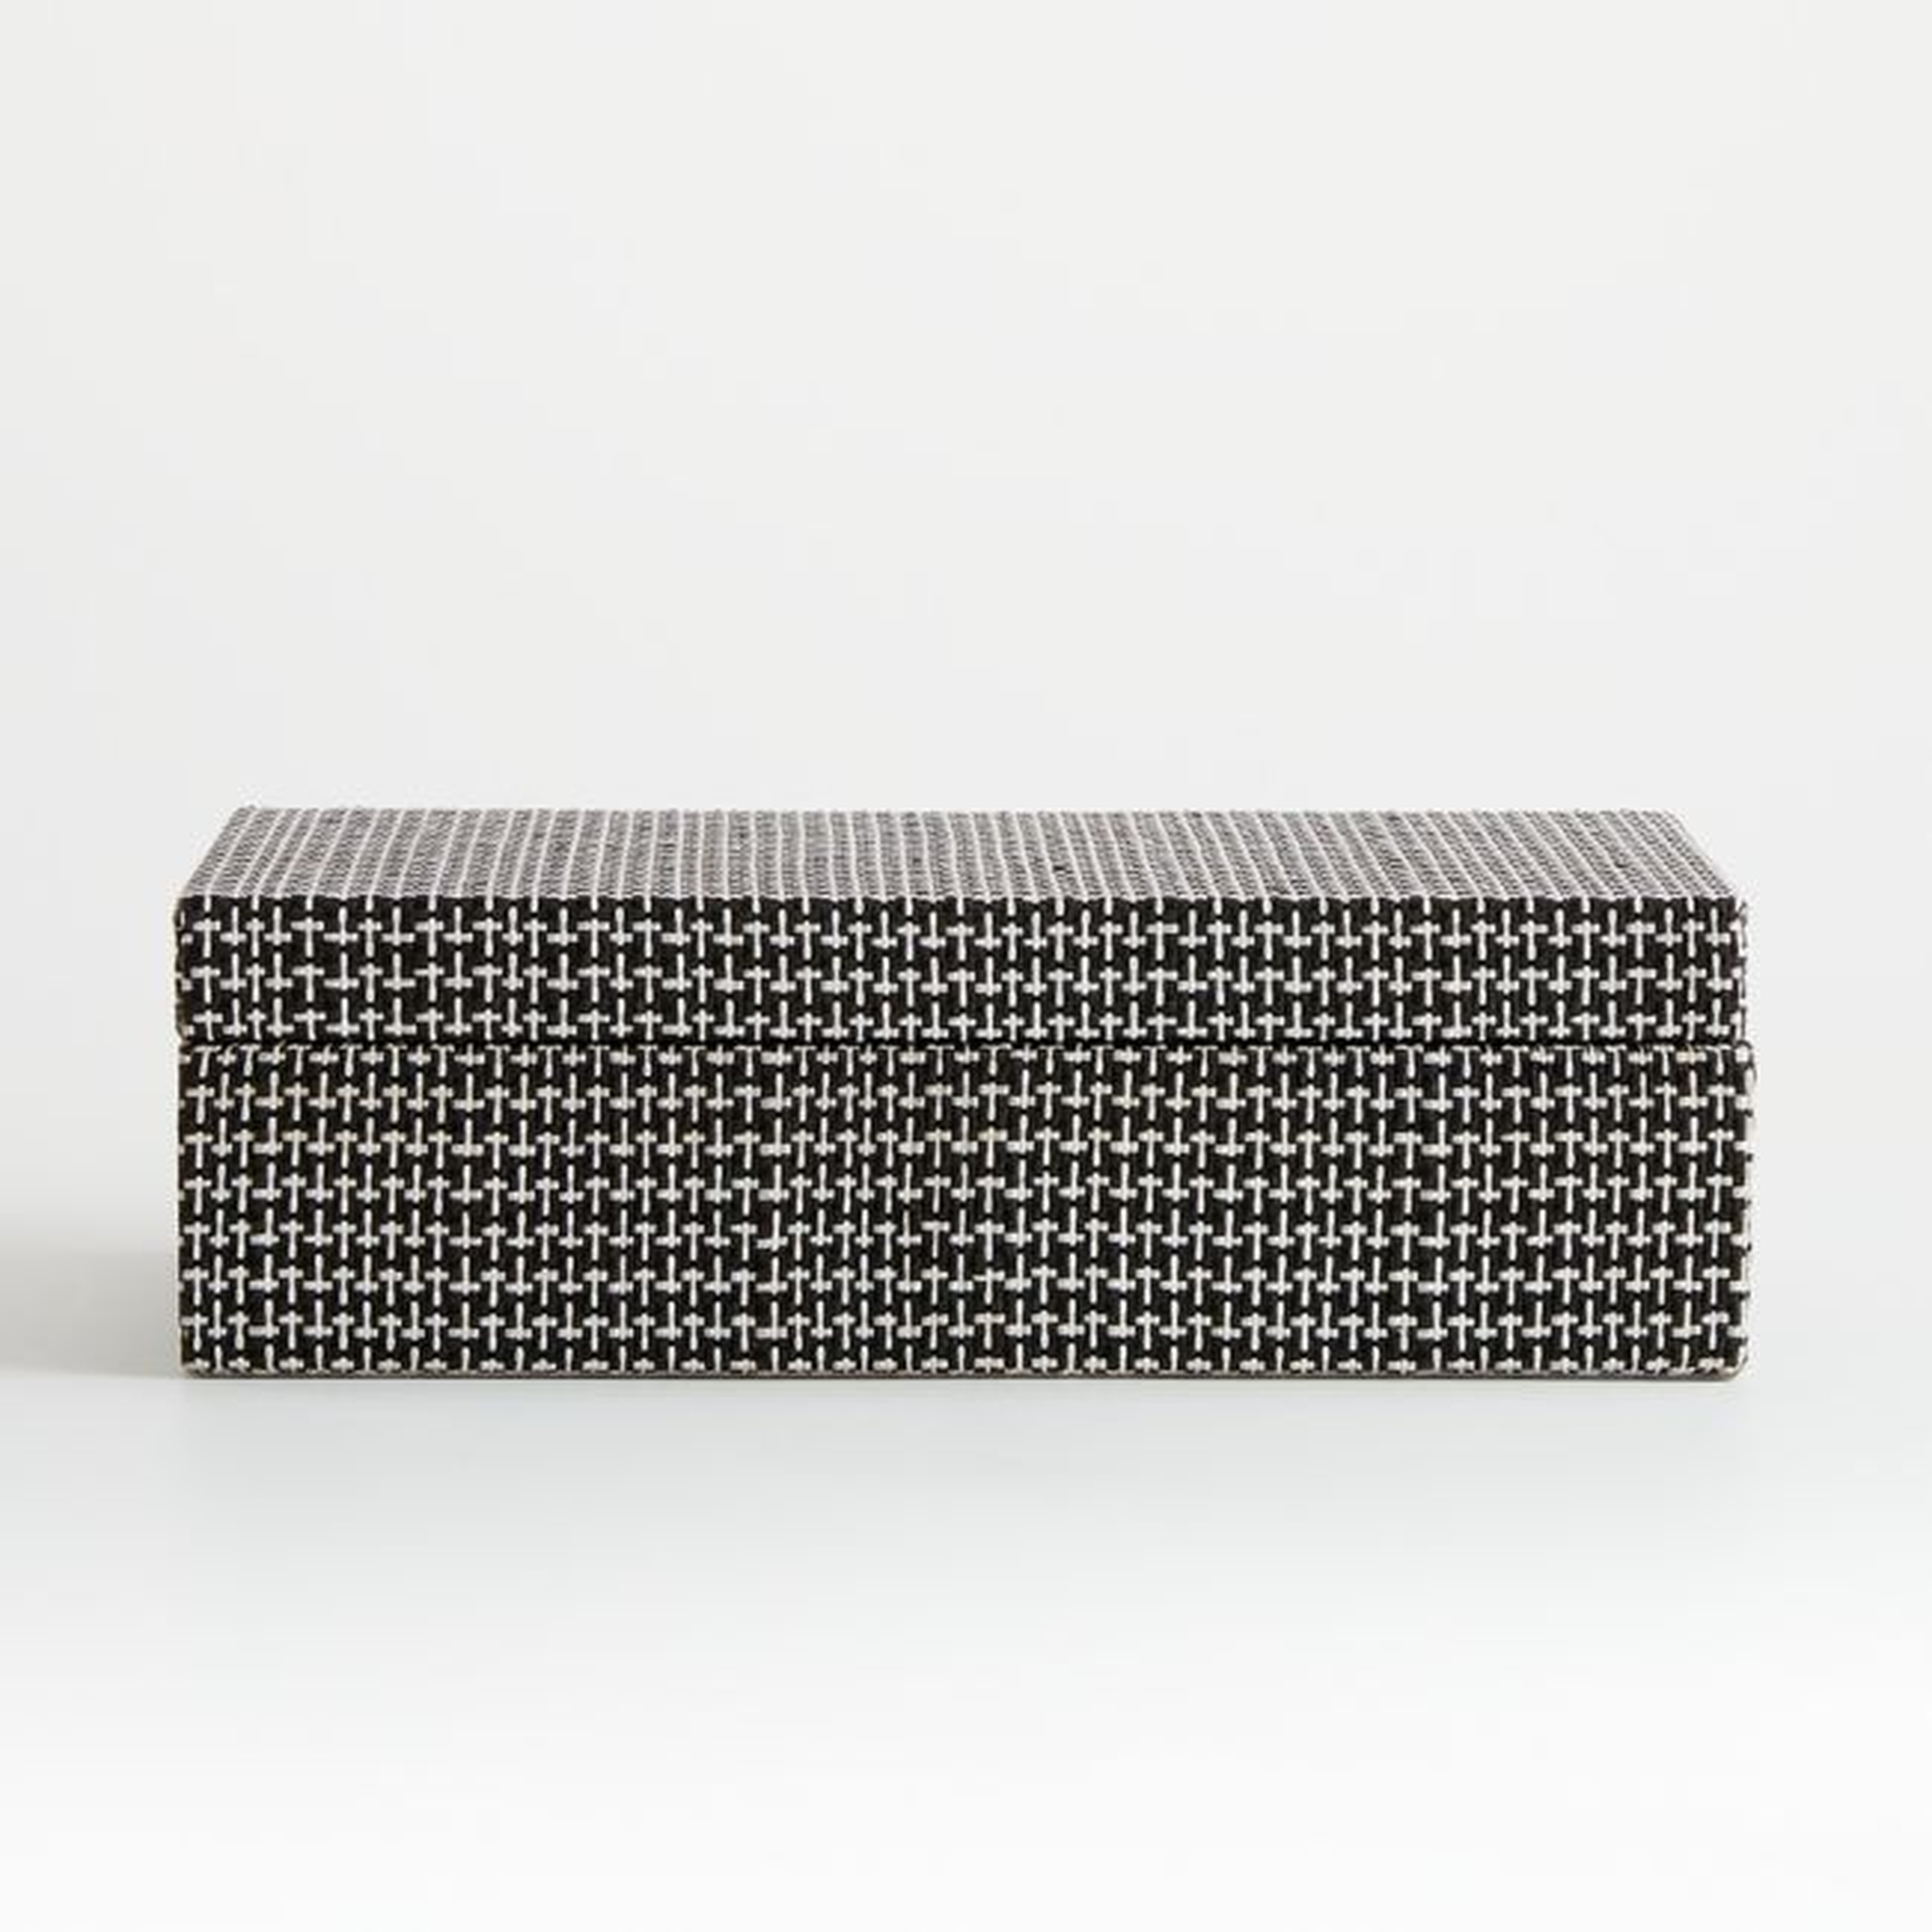 Jolie Large Black and White Woven Box - Crate and Barrel